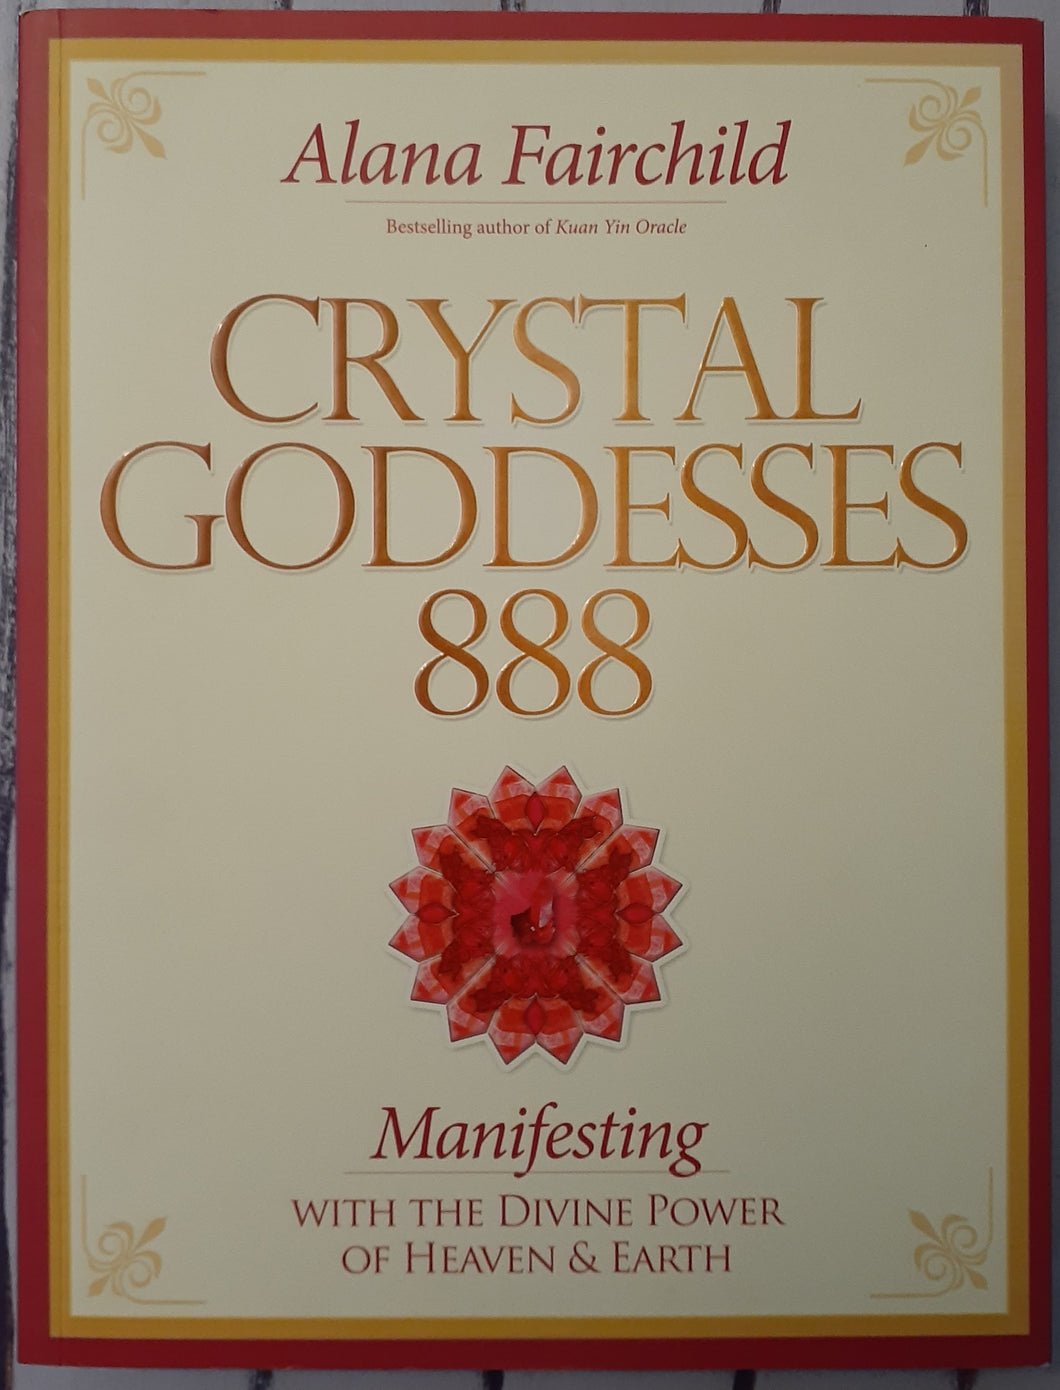 Crystal Goddesses 888: Manifesting with the Divine Power of Heaven and Earth